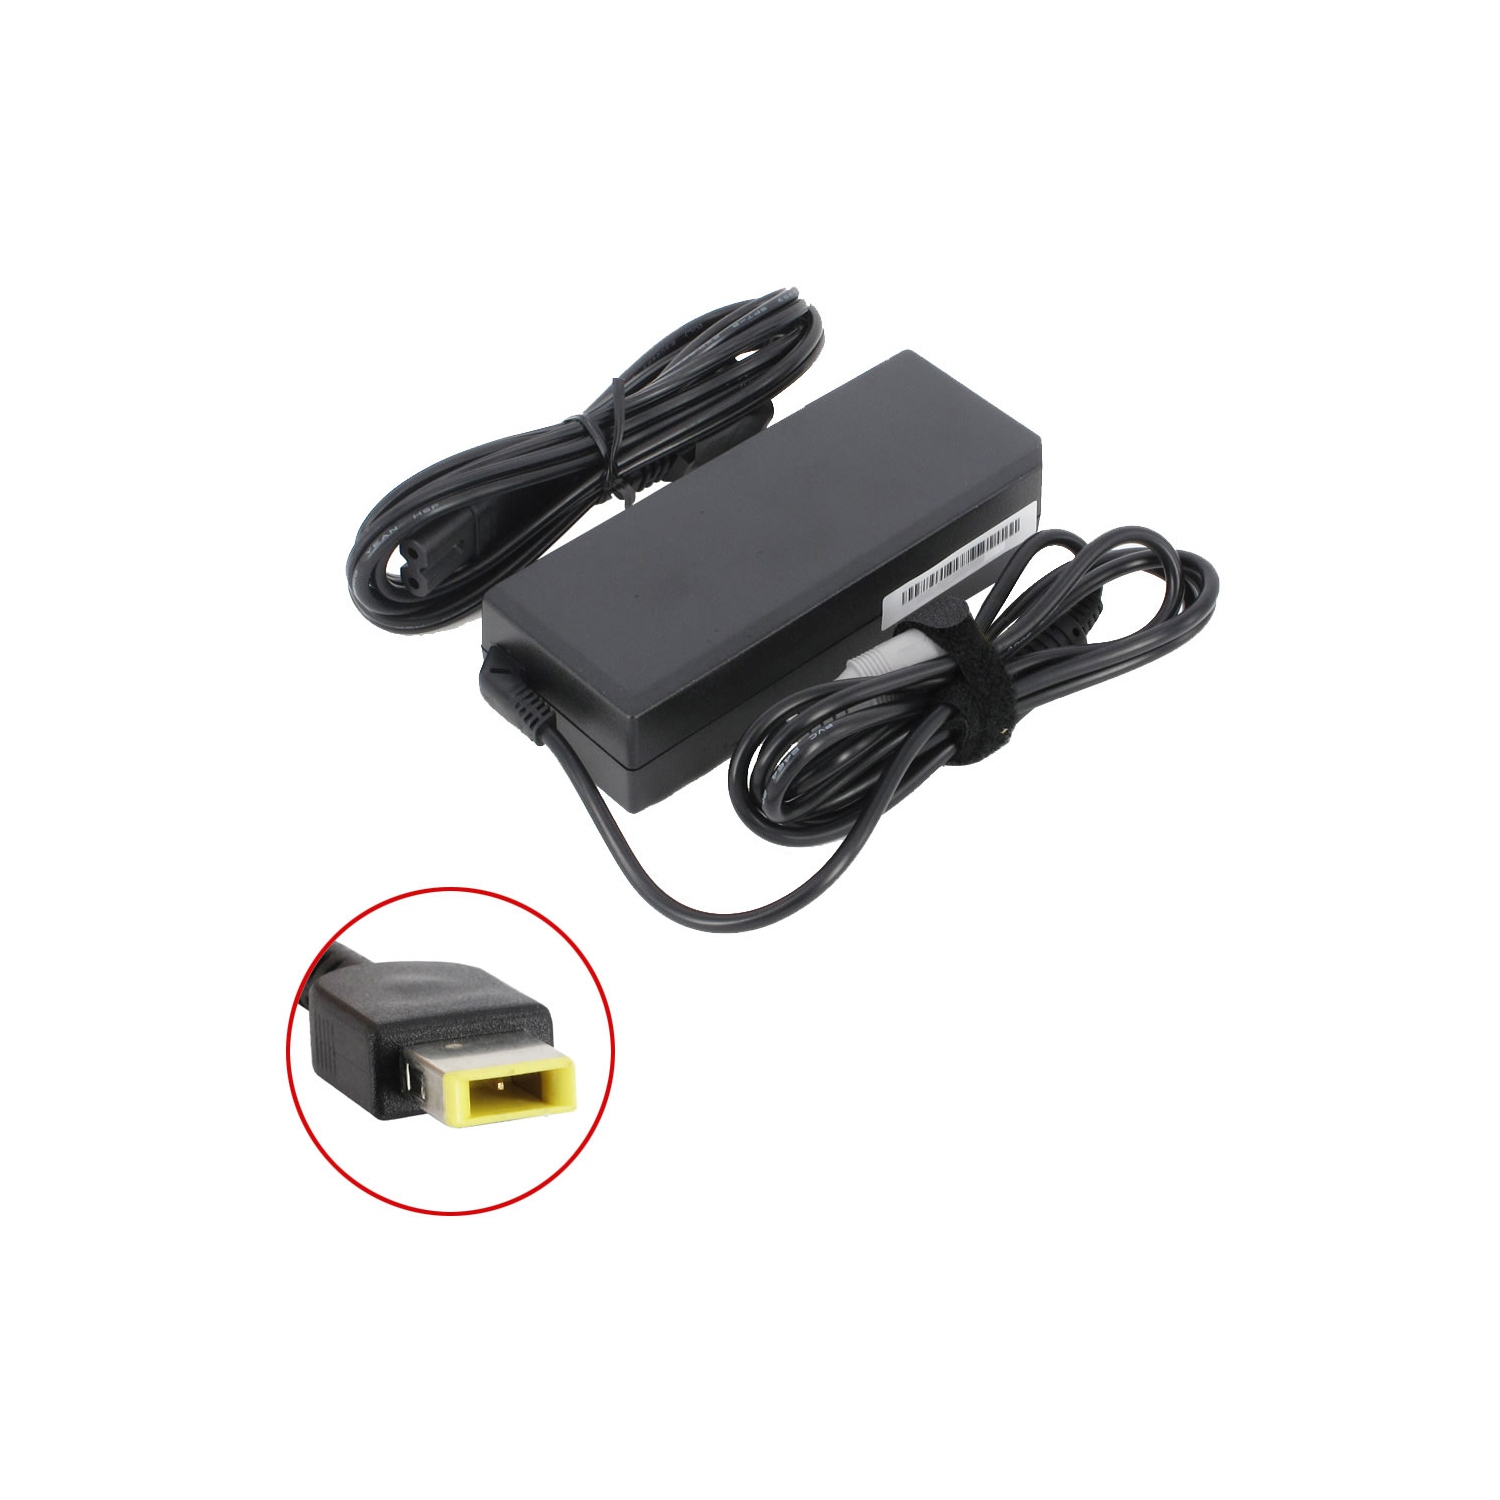 Brand New Laptop AC Adapter for Lenovo IdeaPad 500-15ISK 80NT007NUS, ADP-65XB A, 0B47481, 45N0293, 45N0482, PA-1650-37LF